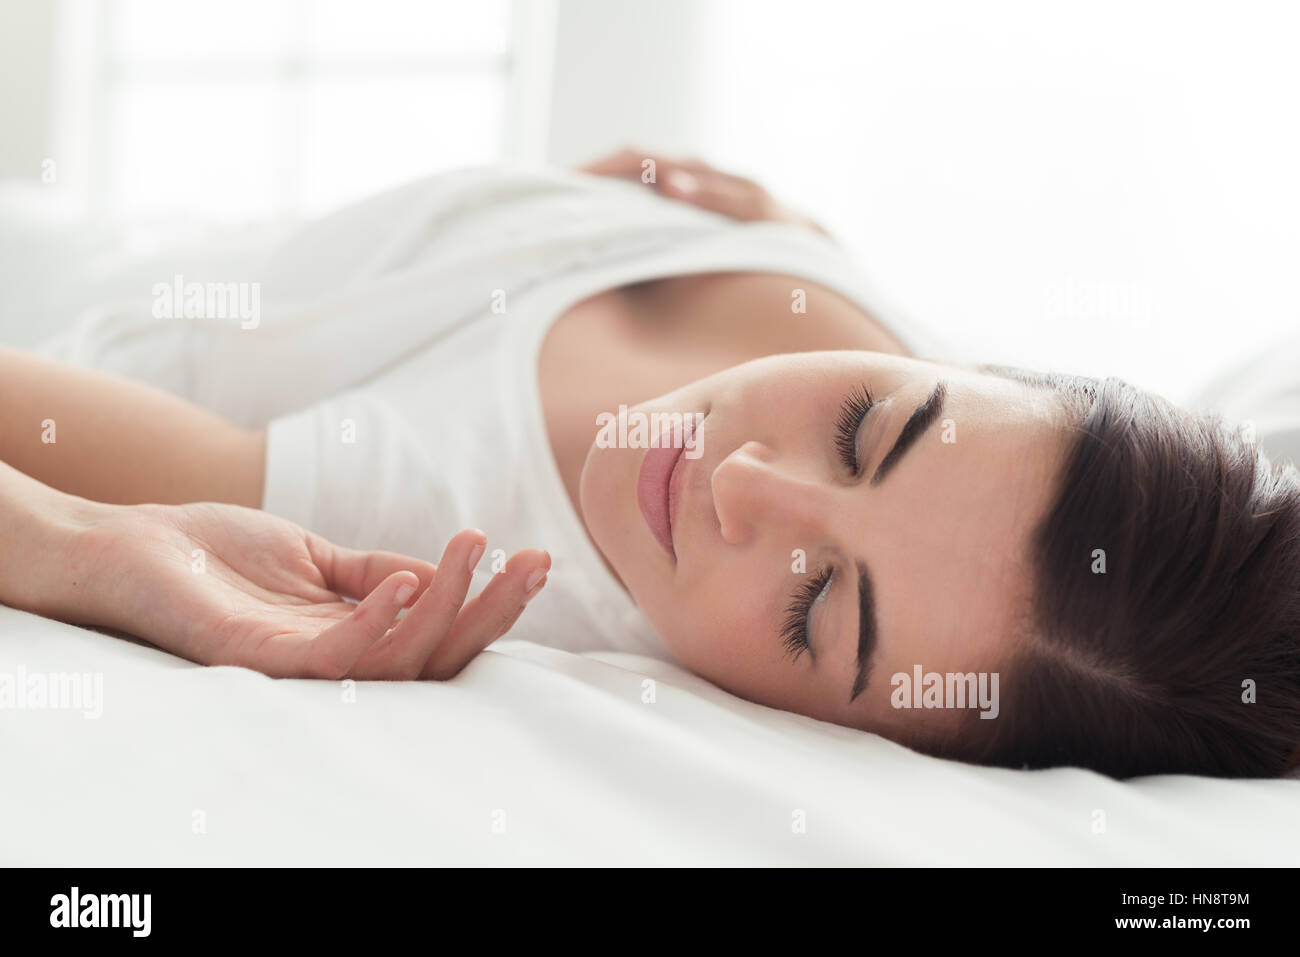 Beautiful smiling woman lying down in bed and relaxing, she is sleeping with eyes closed Stock Photo